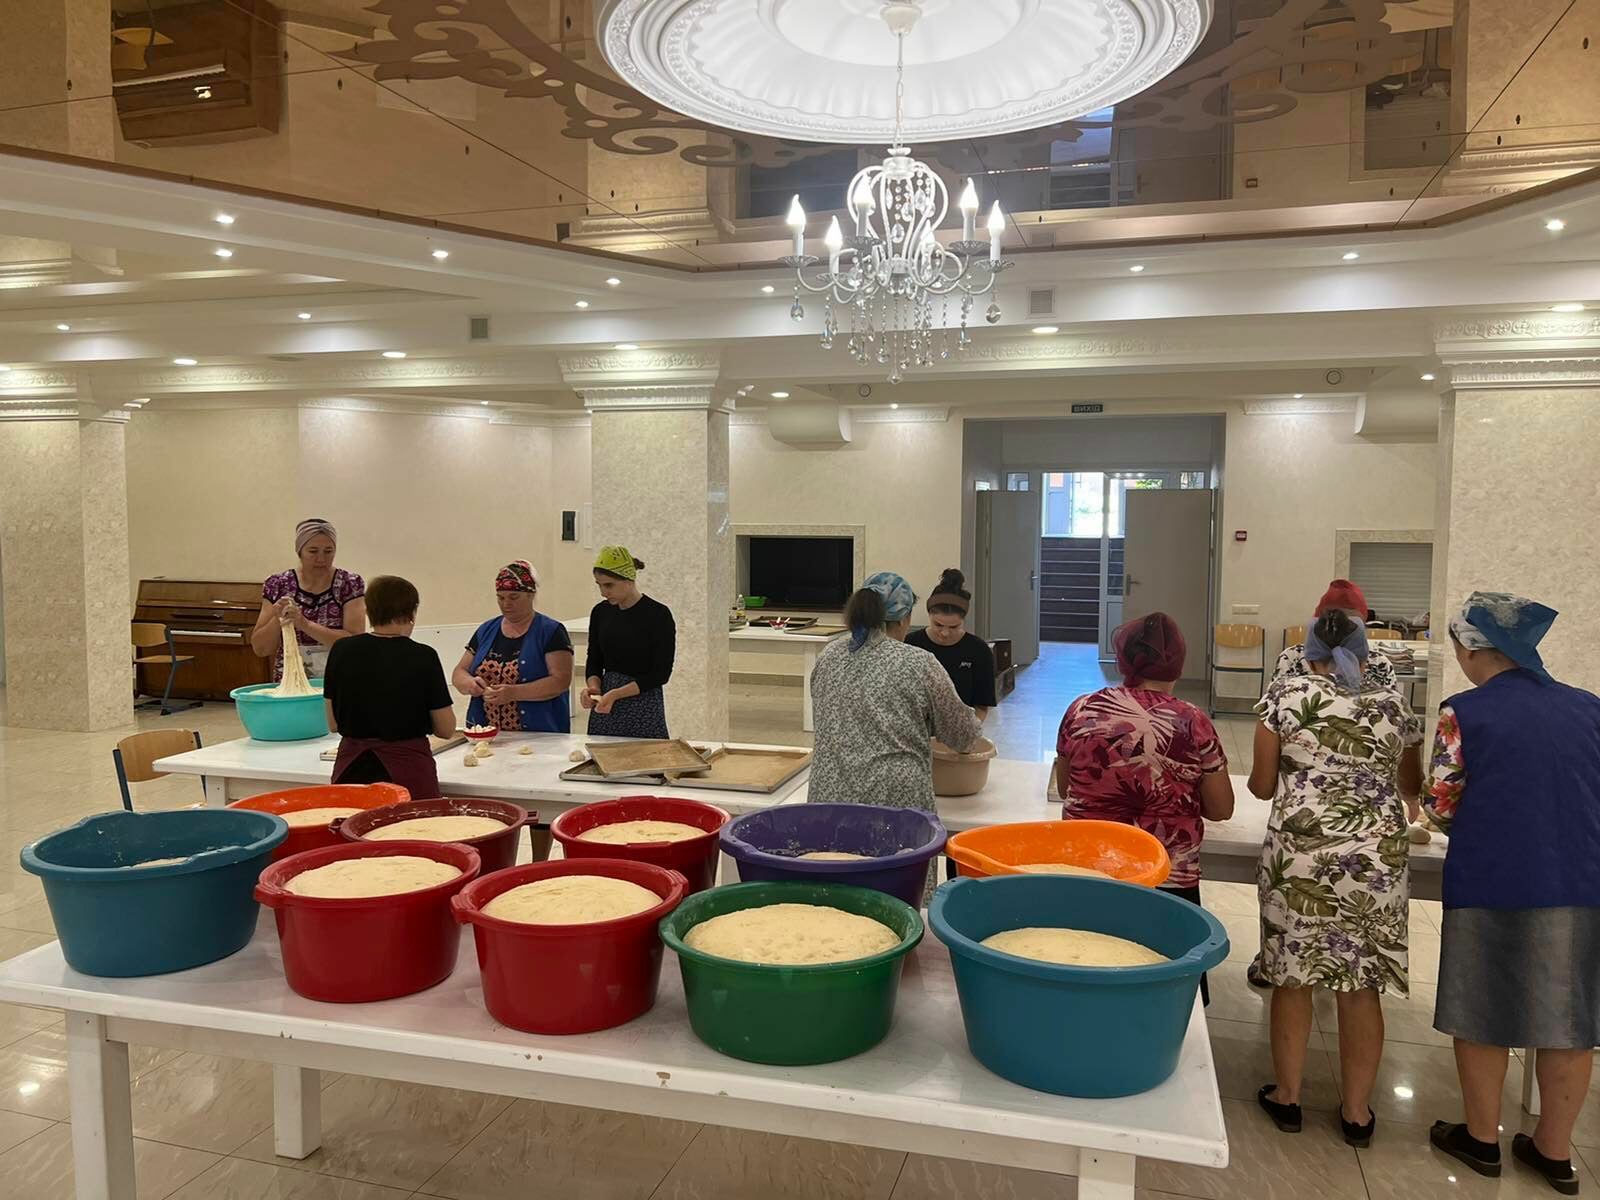 A group of people standing around a table with colorful bowls.